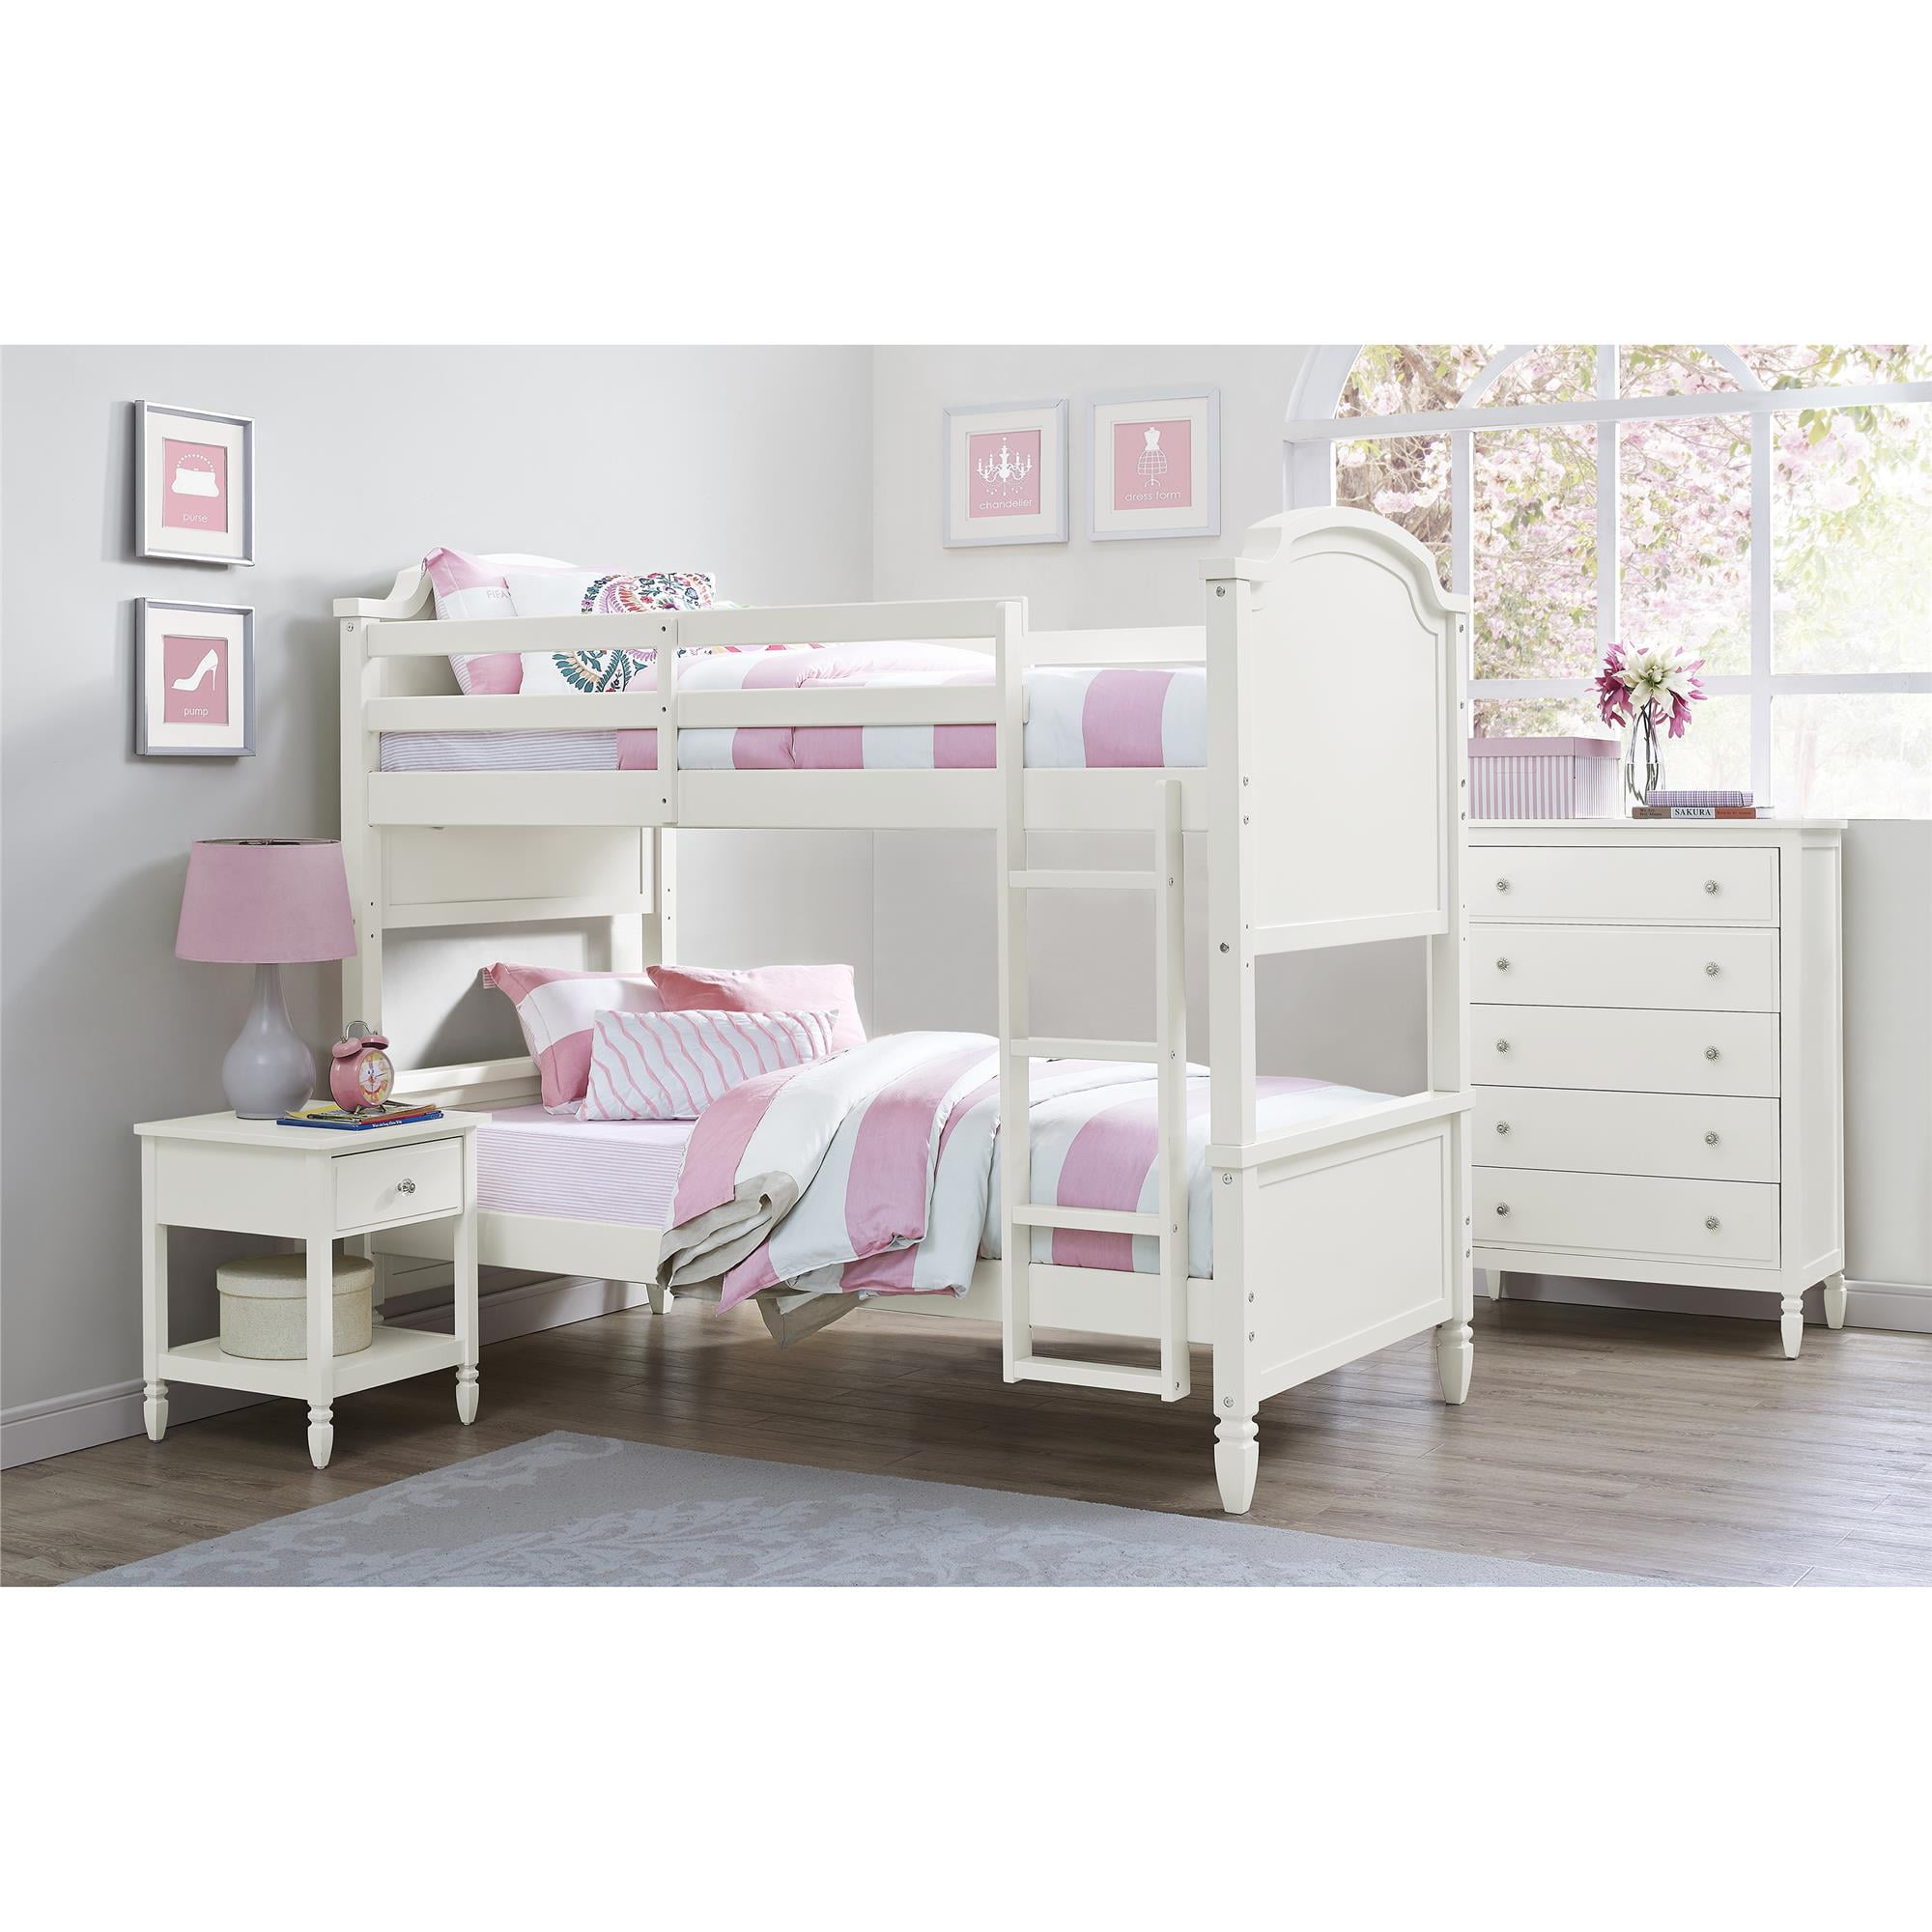 And Gardens Lillian Twin Bunk Bed, Bunk Bed Bedroom Set